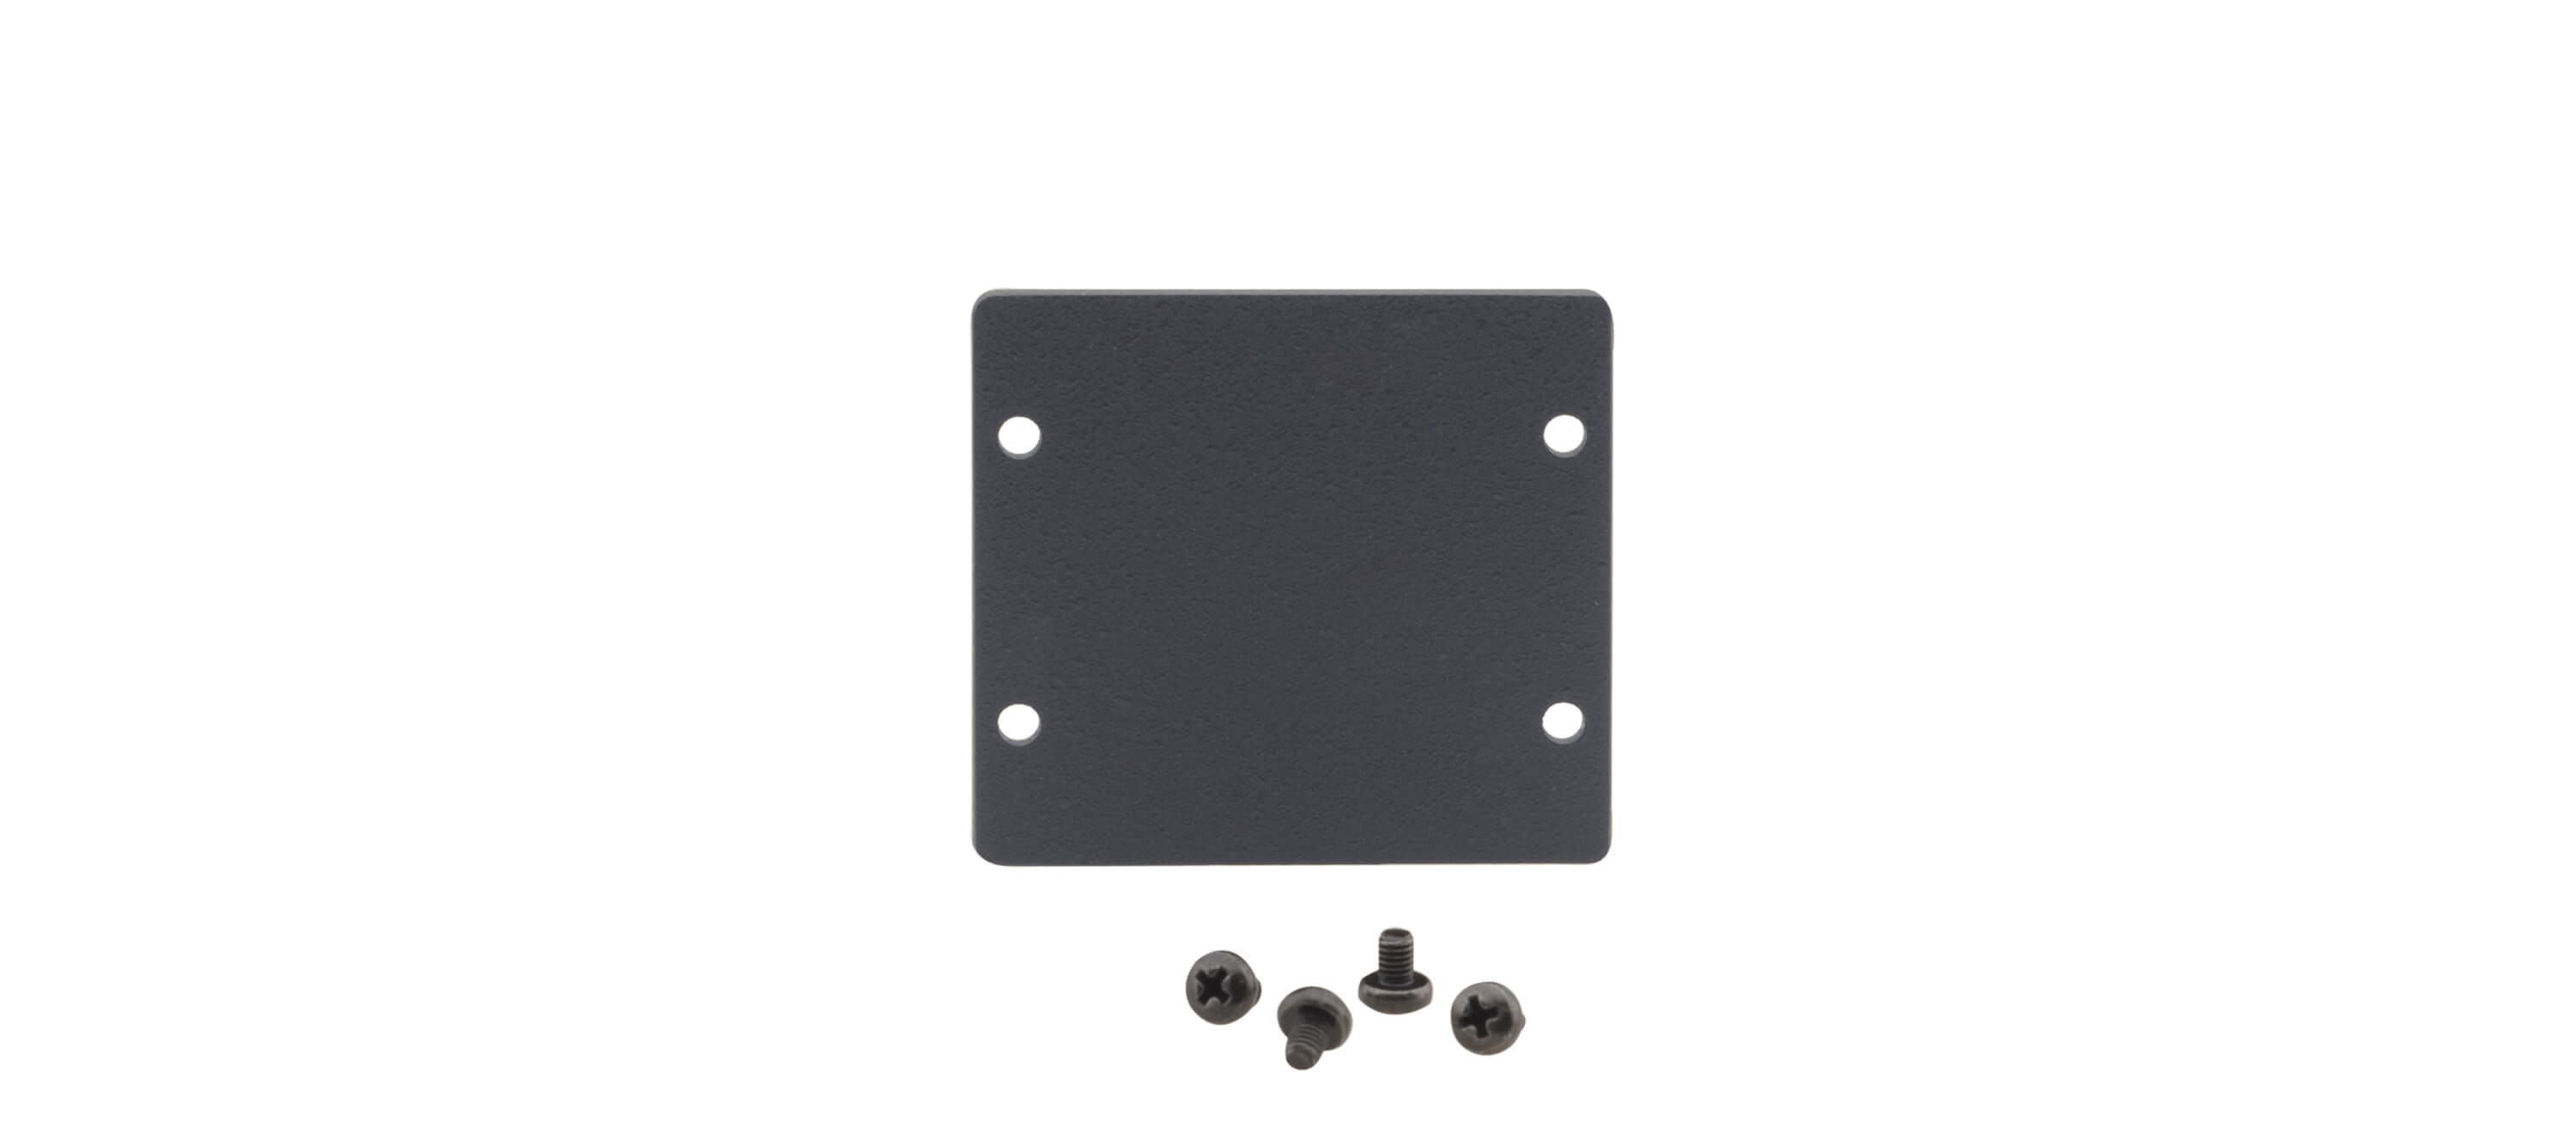 W-2BLANK(B) Wall Plate Insert - Double Blank Slot Cover Plate